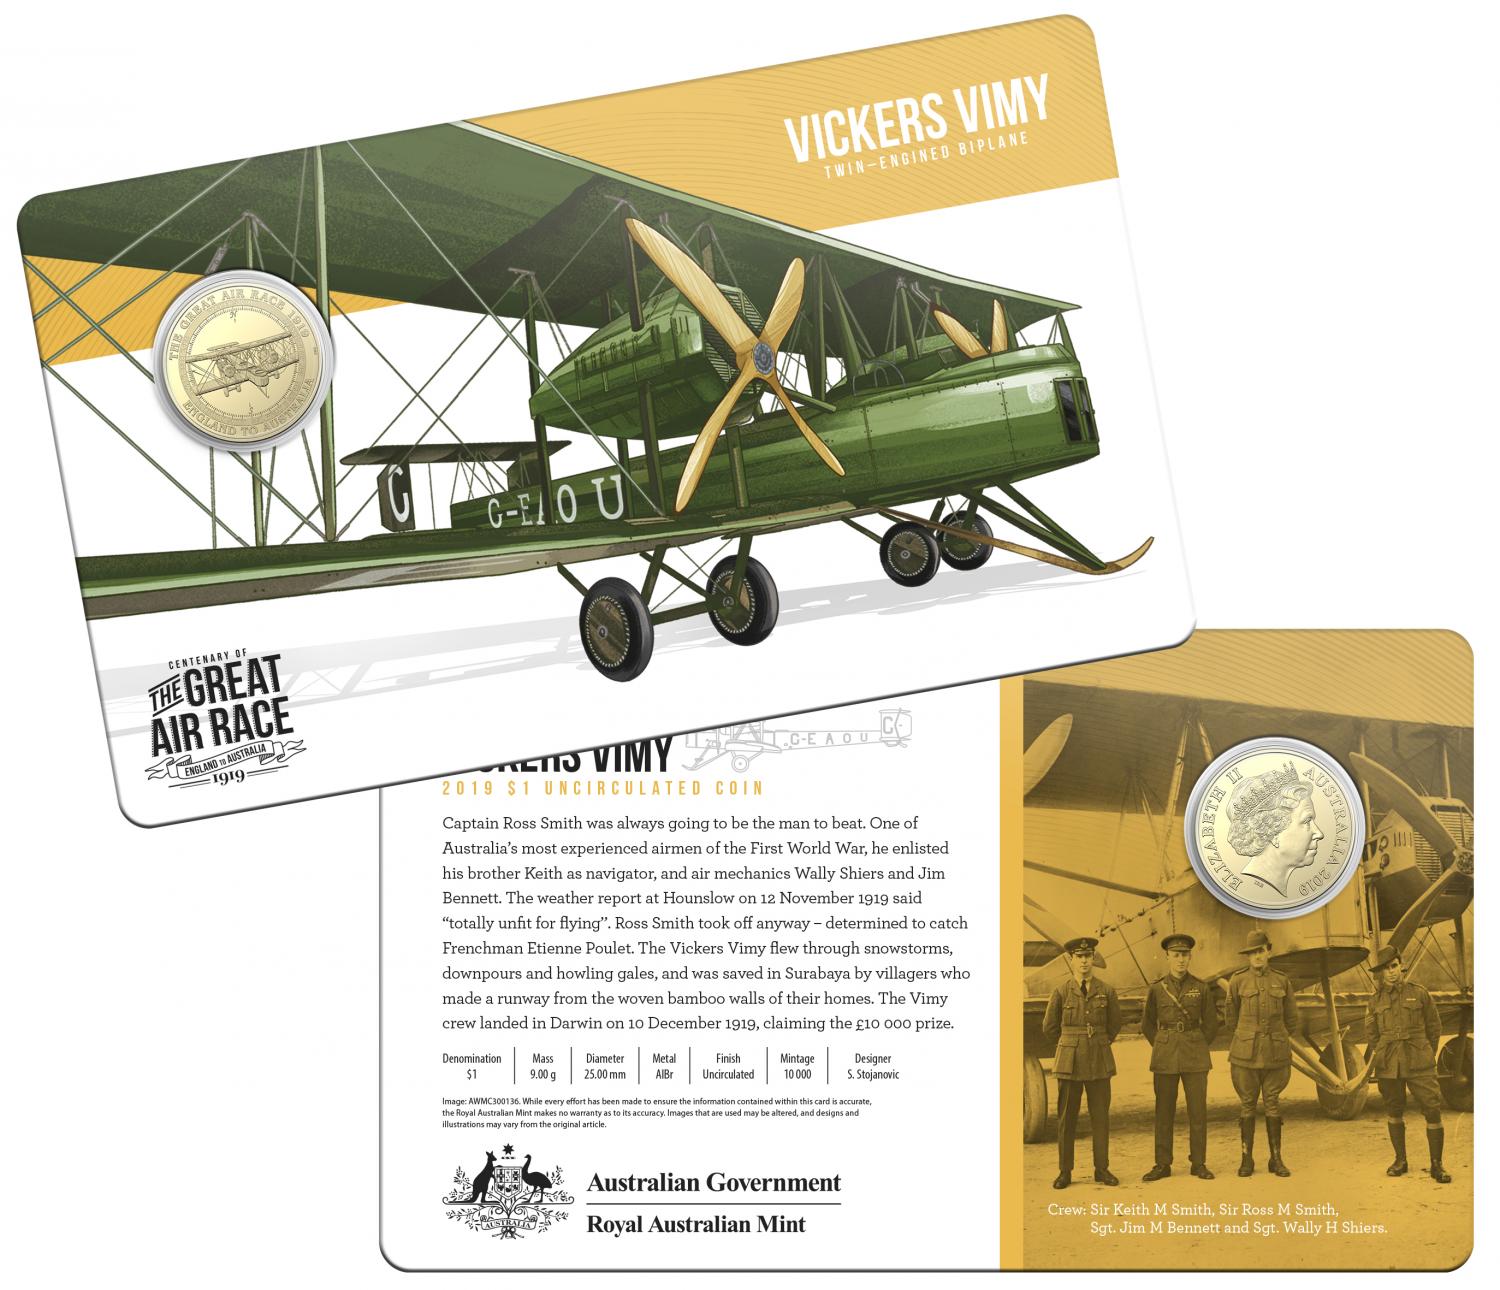 Thumbnail for 2019 Centenary off the Great Air Race Uncirculated $1.00 - Vickers Vimy